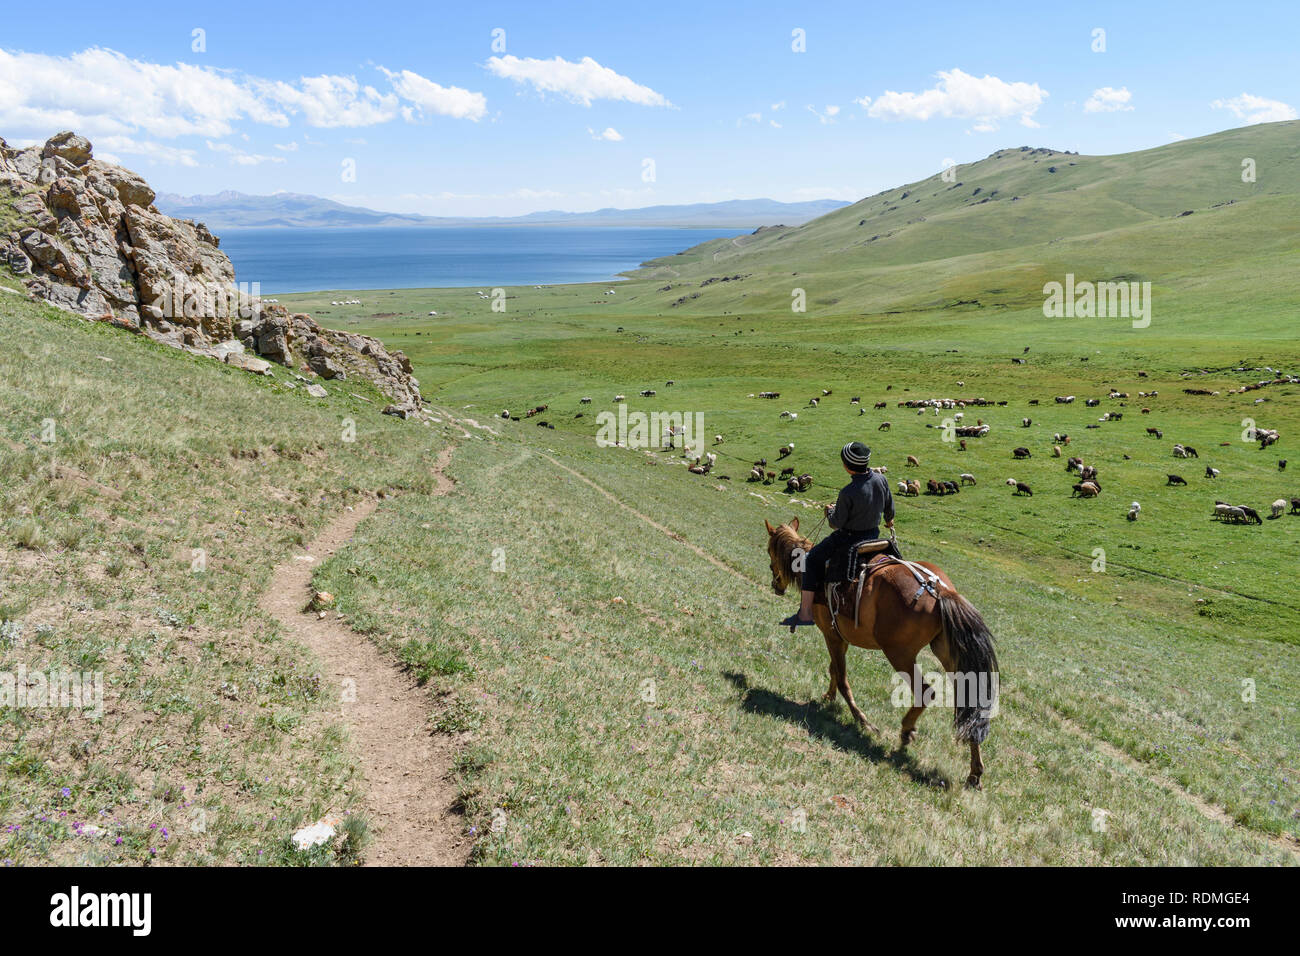 man on horseback riding through valley with lake in the distance, Song kul,  Kyrgyzstan Stock Photo - Alamy